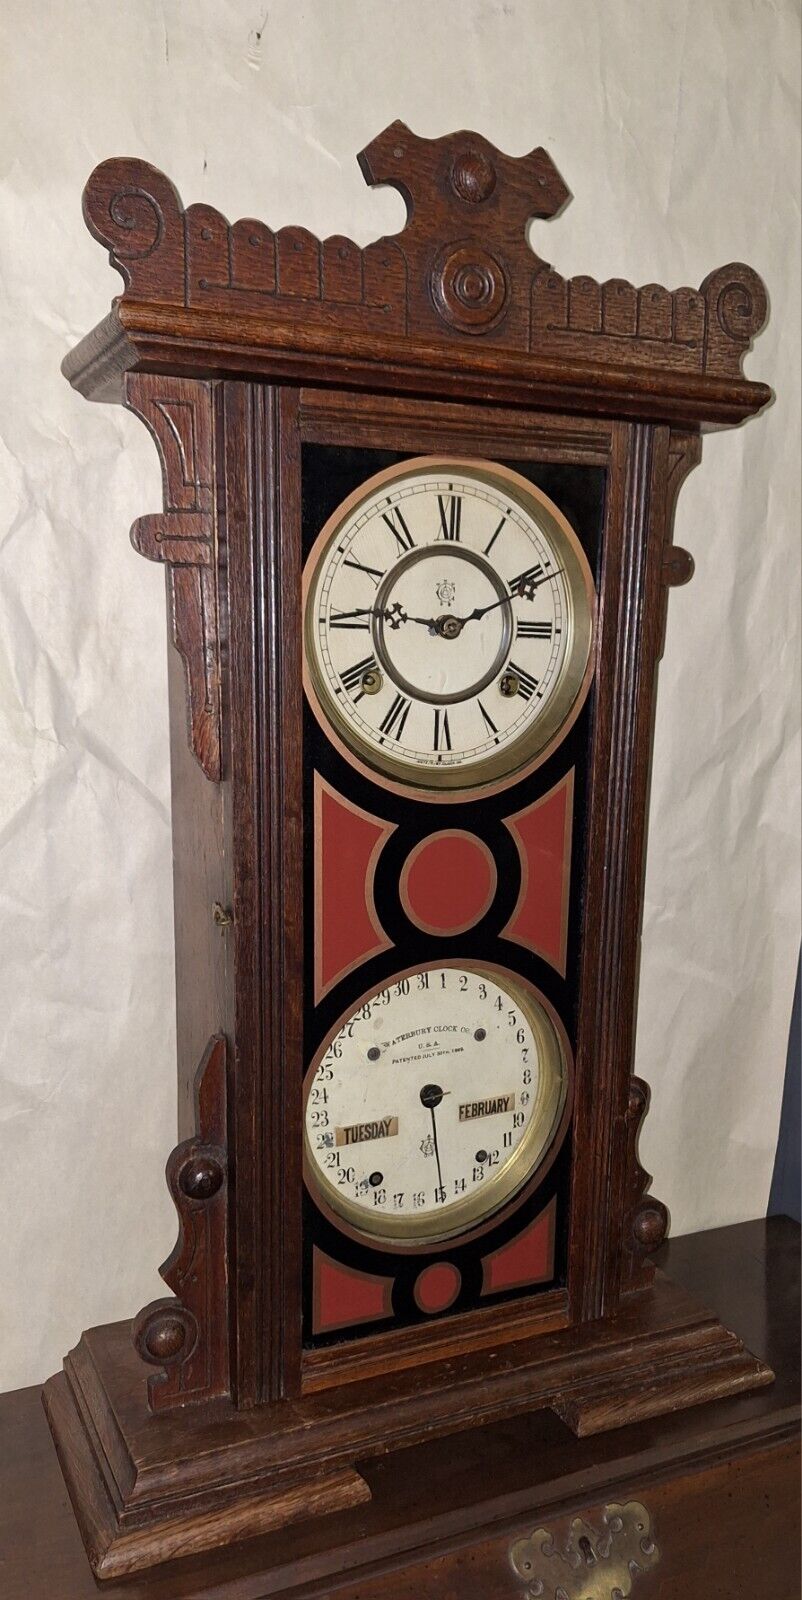 ANTIQUE WATERBURY DOUBLE DIAL CALENDAR CHIME CLOCK, 8 DAY, WORKING MODEL 44